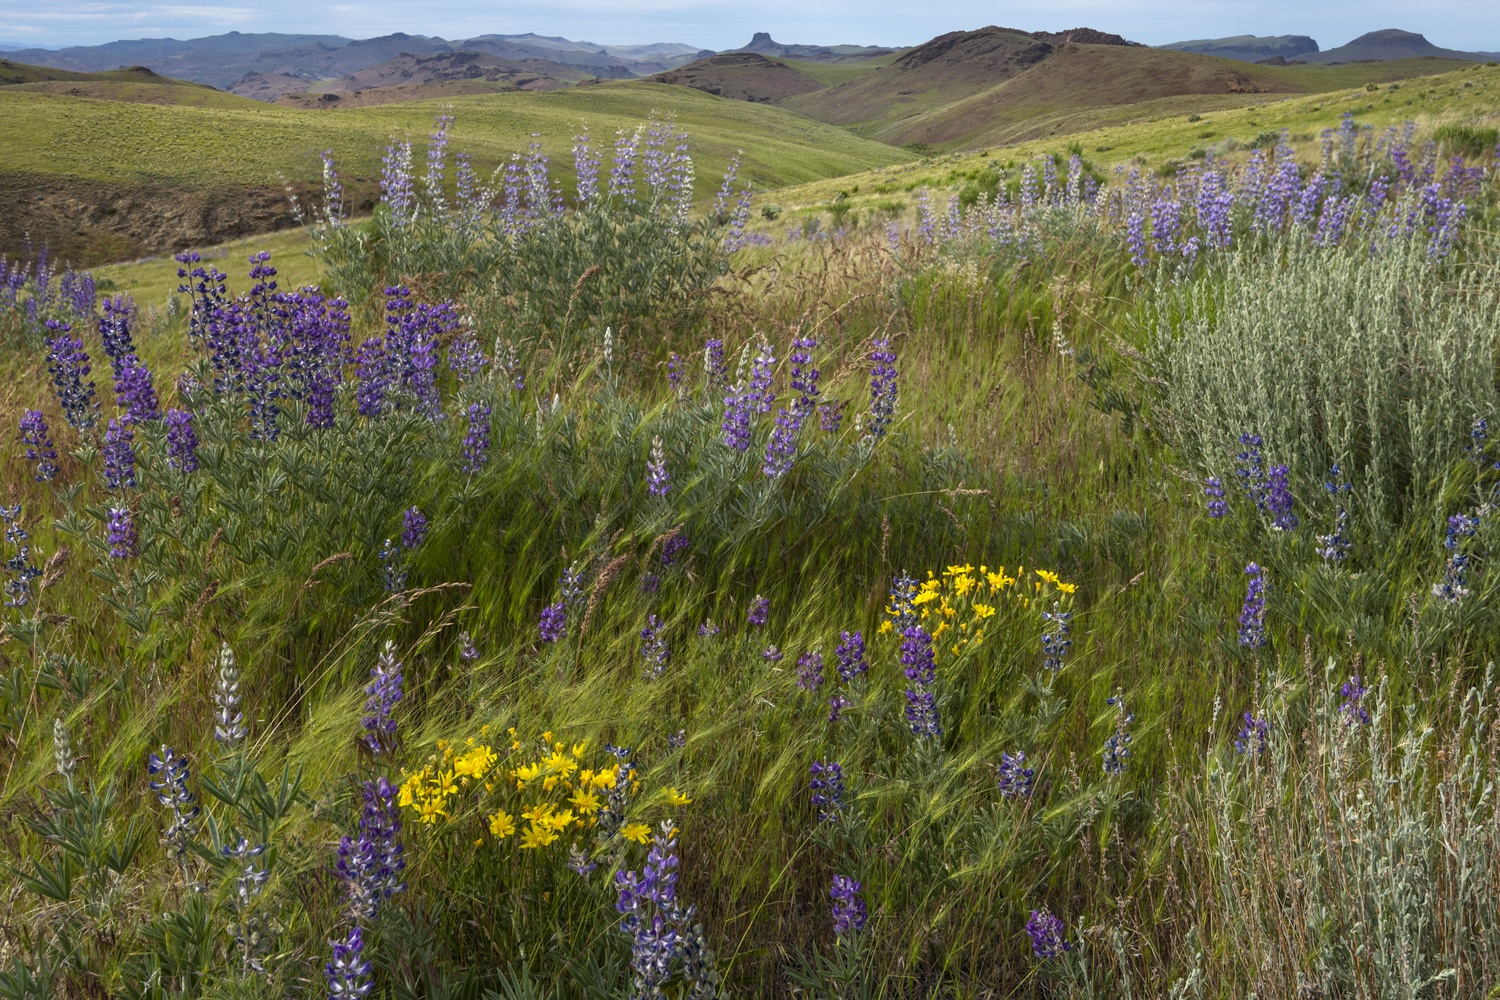 Wildflowers can be seen among rolling hills and mountains in the distance.